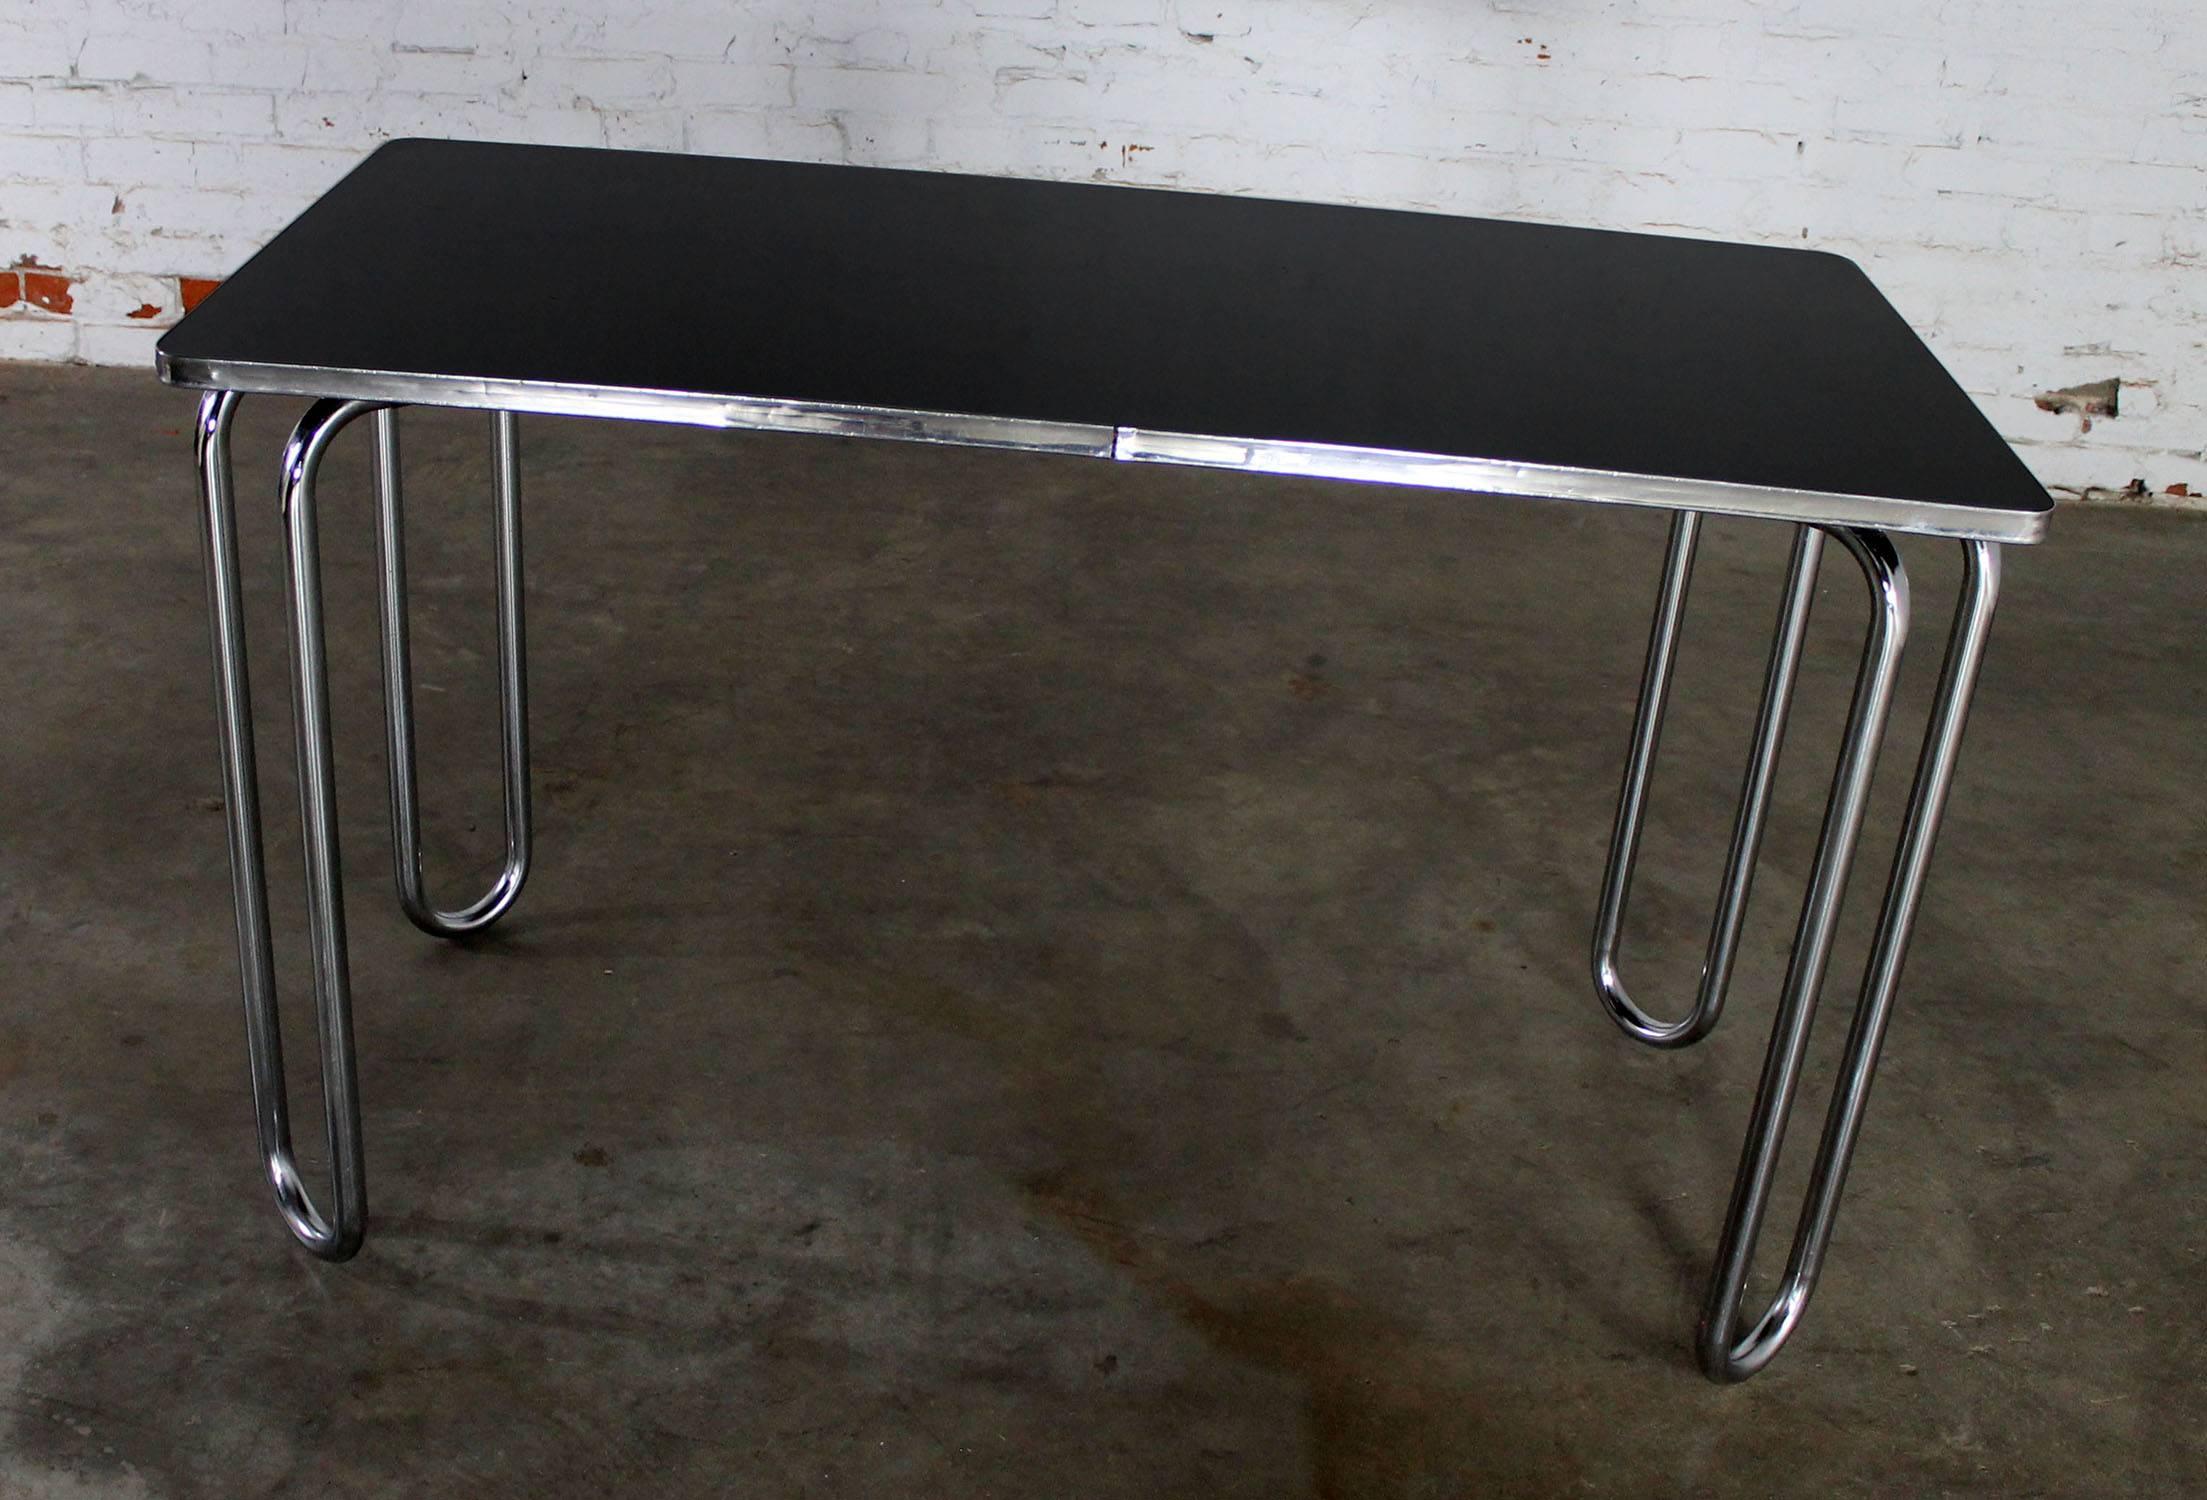 Awesome chrome base and black laminate-like topped Art Deco streamline machine age table with chrome edge trim. Use it as a sofa table, entry table, writing table, or dinette table. In wonderful vintage condition, circa 1930.

I so love the